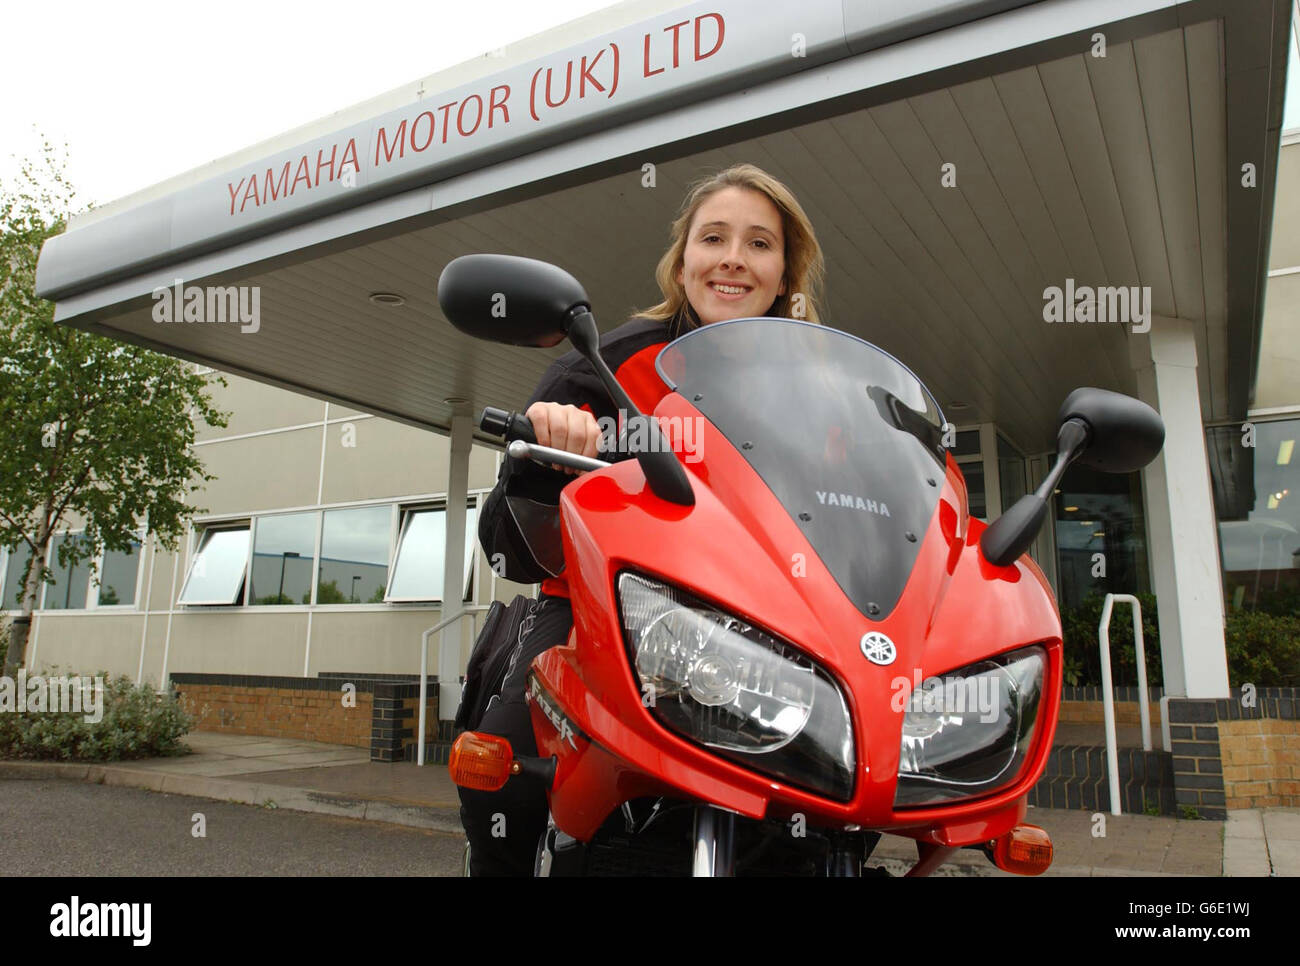 Former Big Brother contestant Elizabeth Woodcock on her new Yamaha motorbike before she heads off on a three-month-tour of the former communist 'Big Brother' states of Eastern Europe. *..Elizabeth will be making a video and radio diary of her journey which can be accessed on her website www.eaw.co.uk. Stock Photo